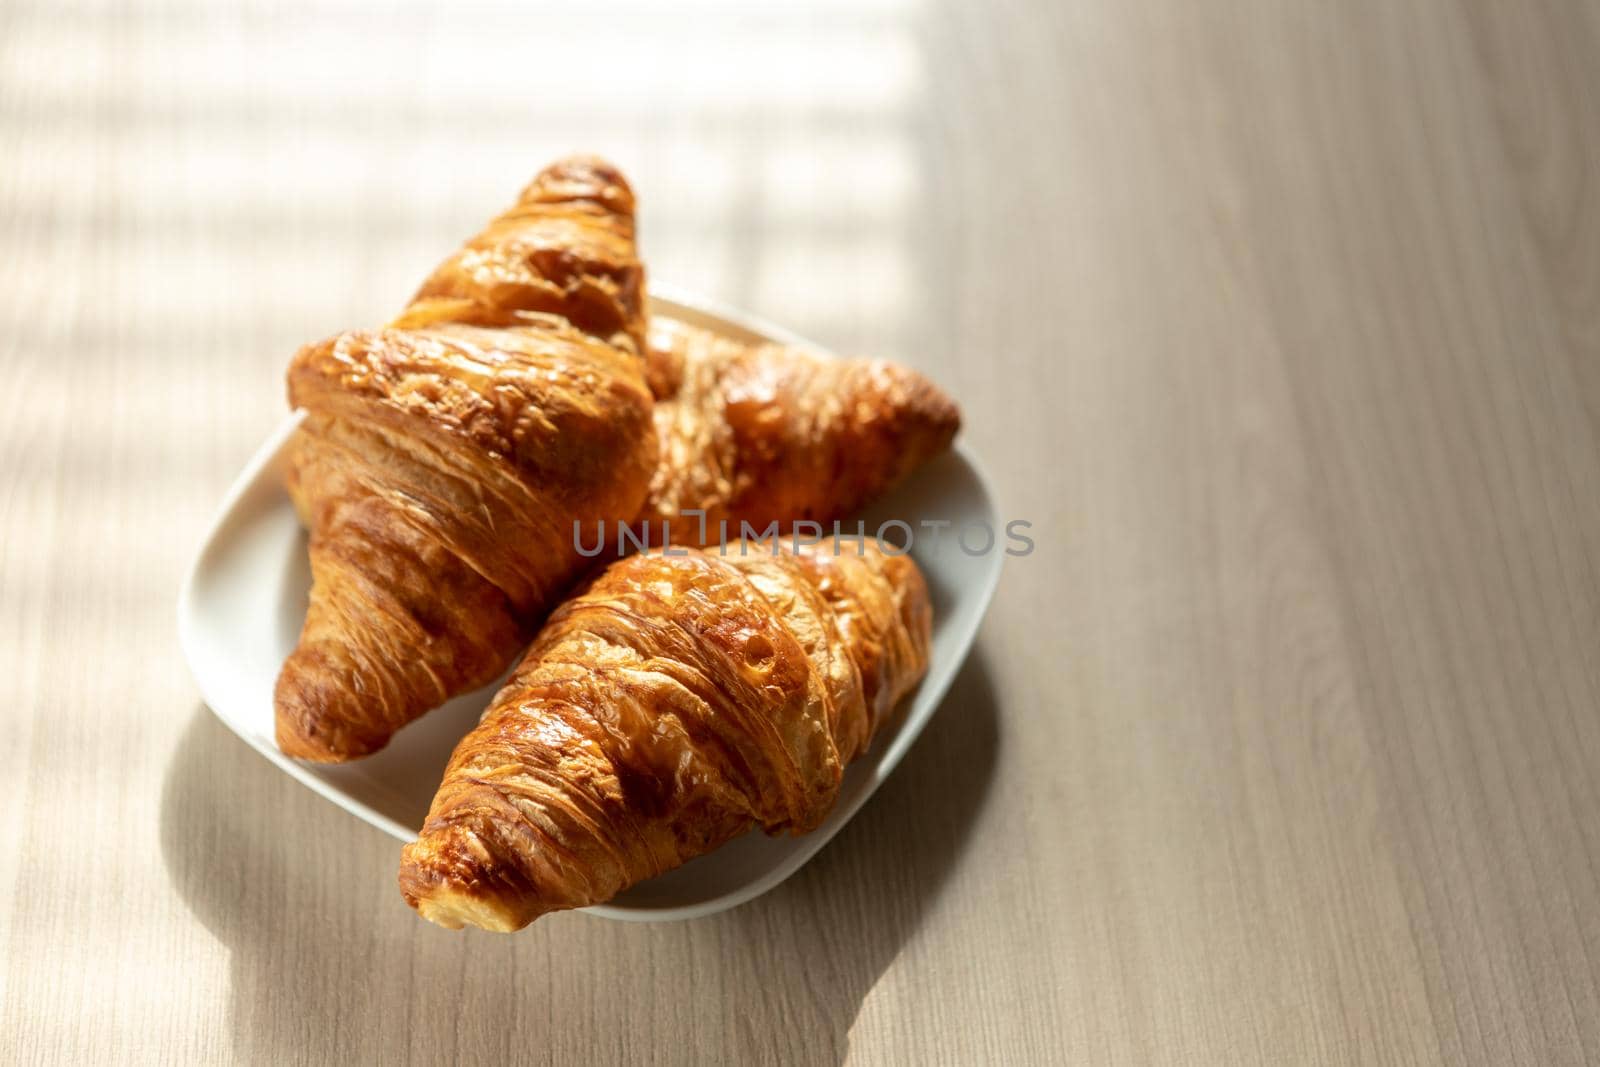 there are three crispy croissants on a white breakfast plate on the table